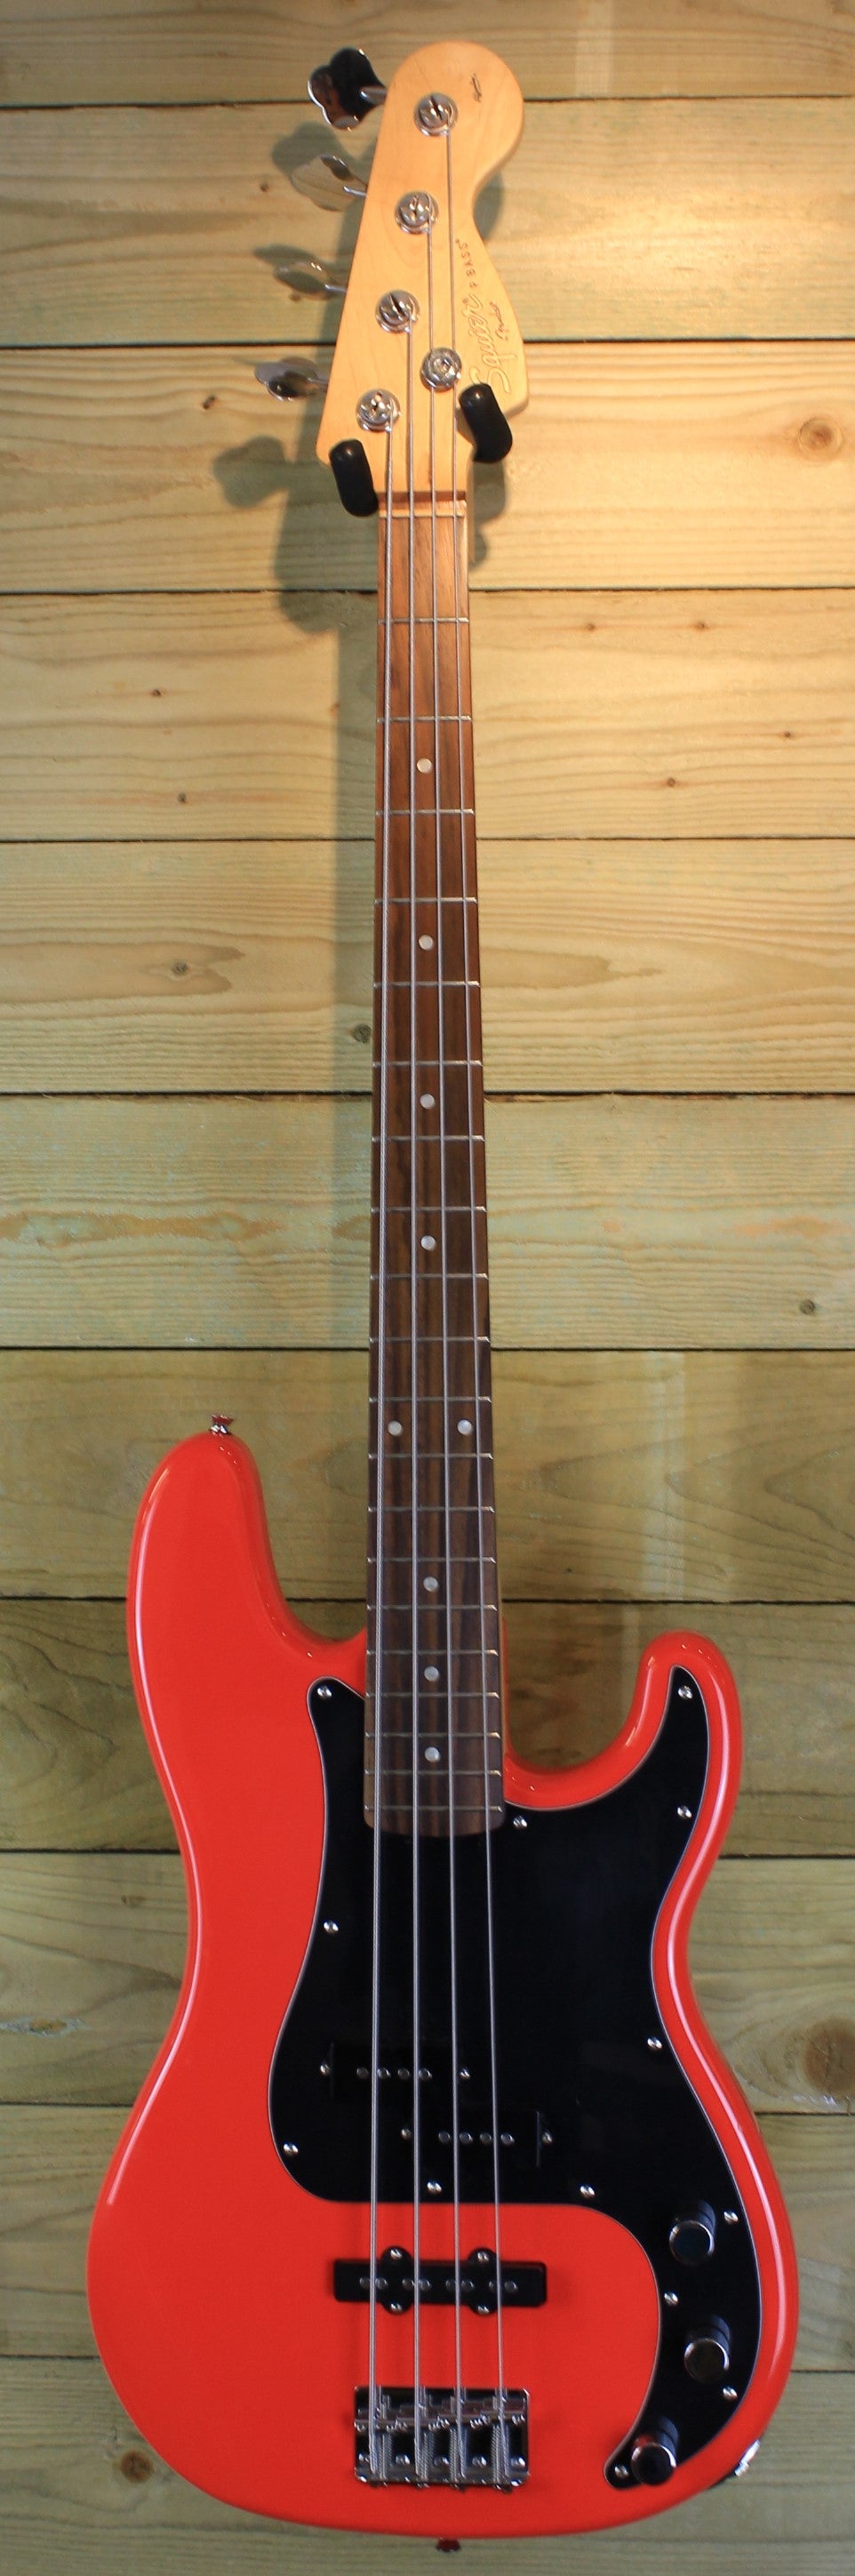 Squire P bass